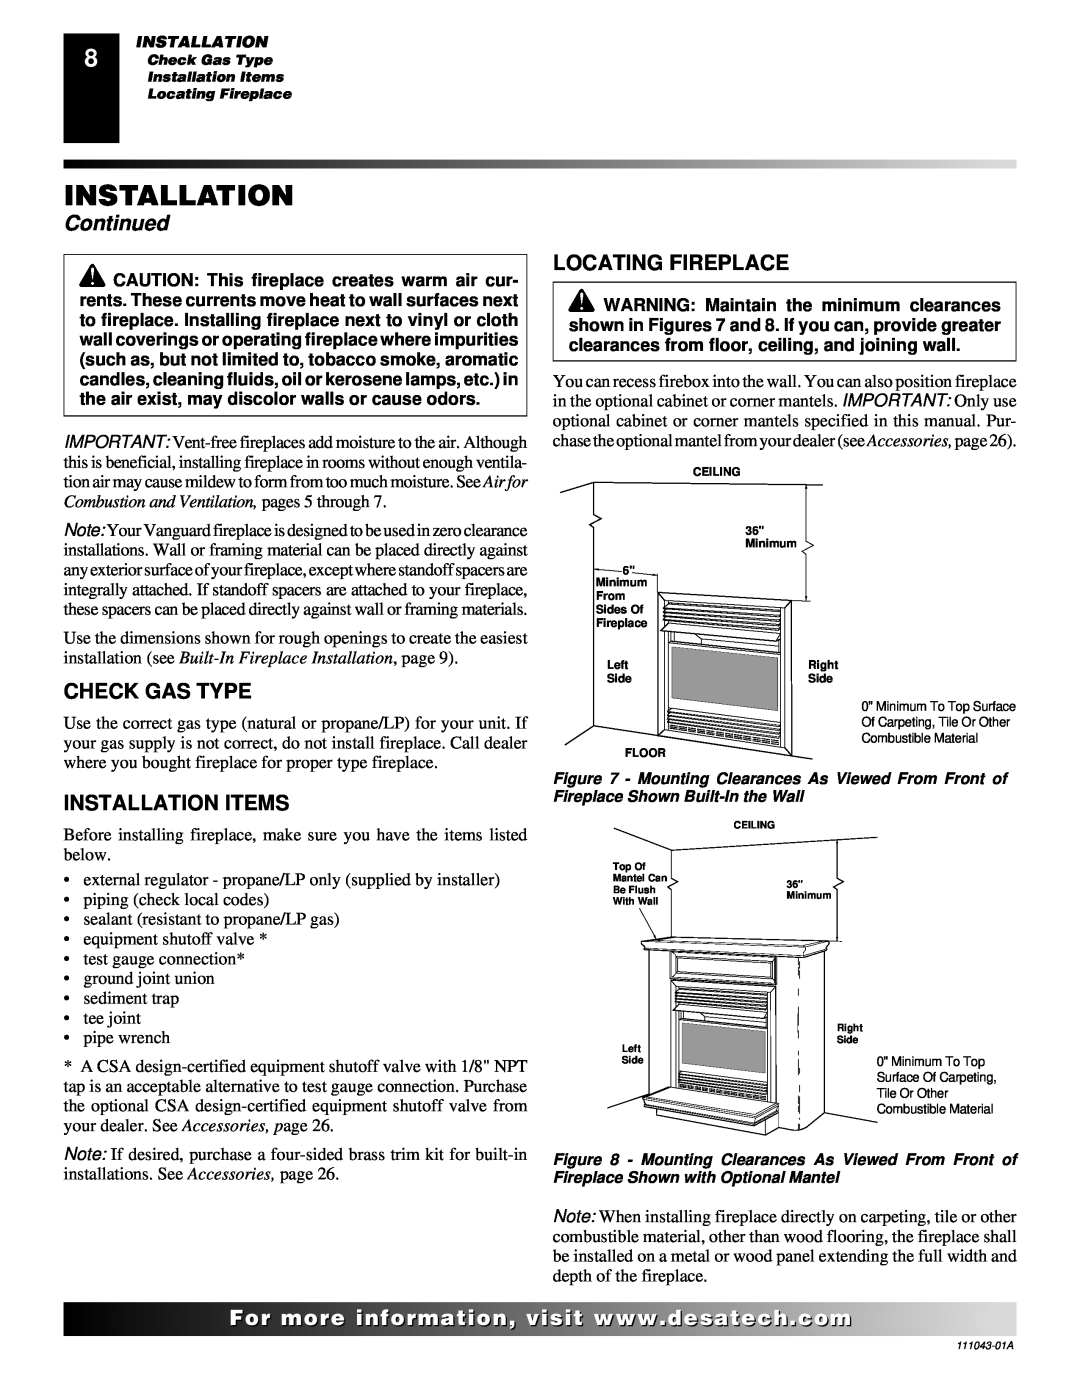 Vanguard Heating WMH26TNB installation manual Continued, Check Gas Type, Installation Items, Locating Fireplace 